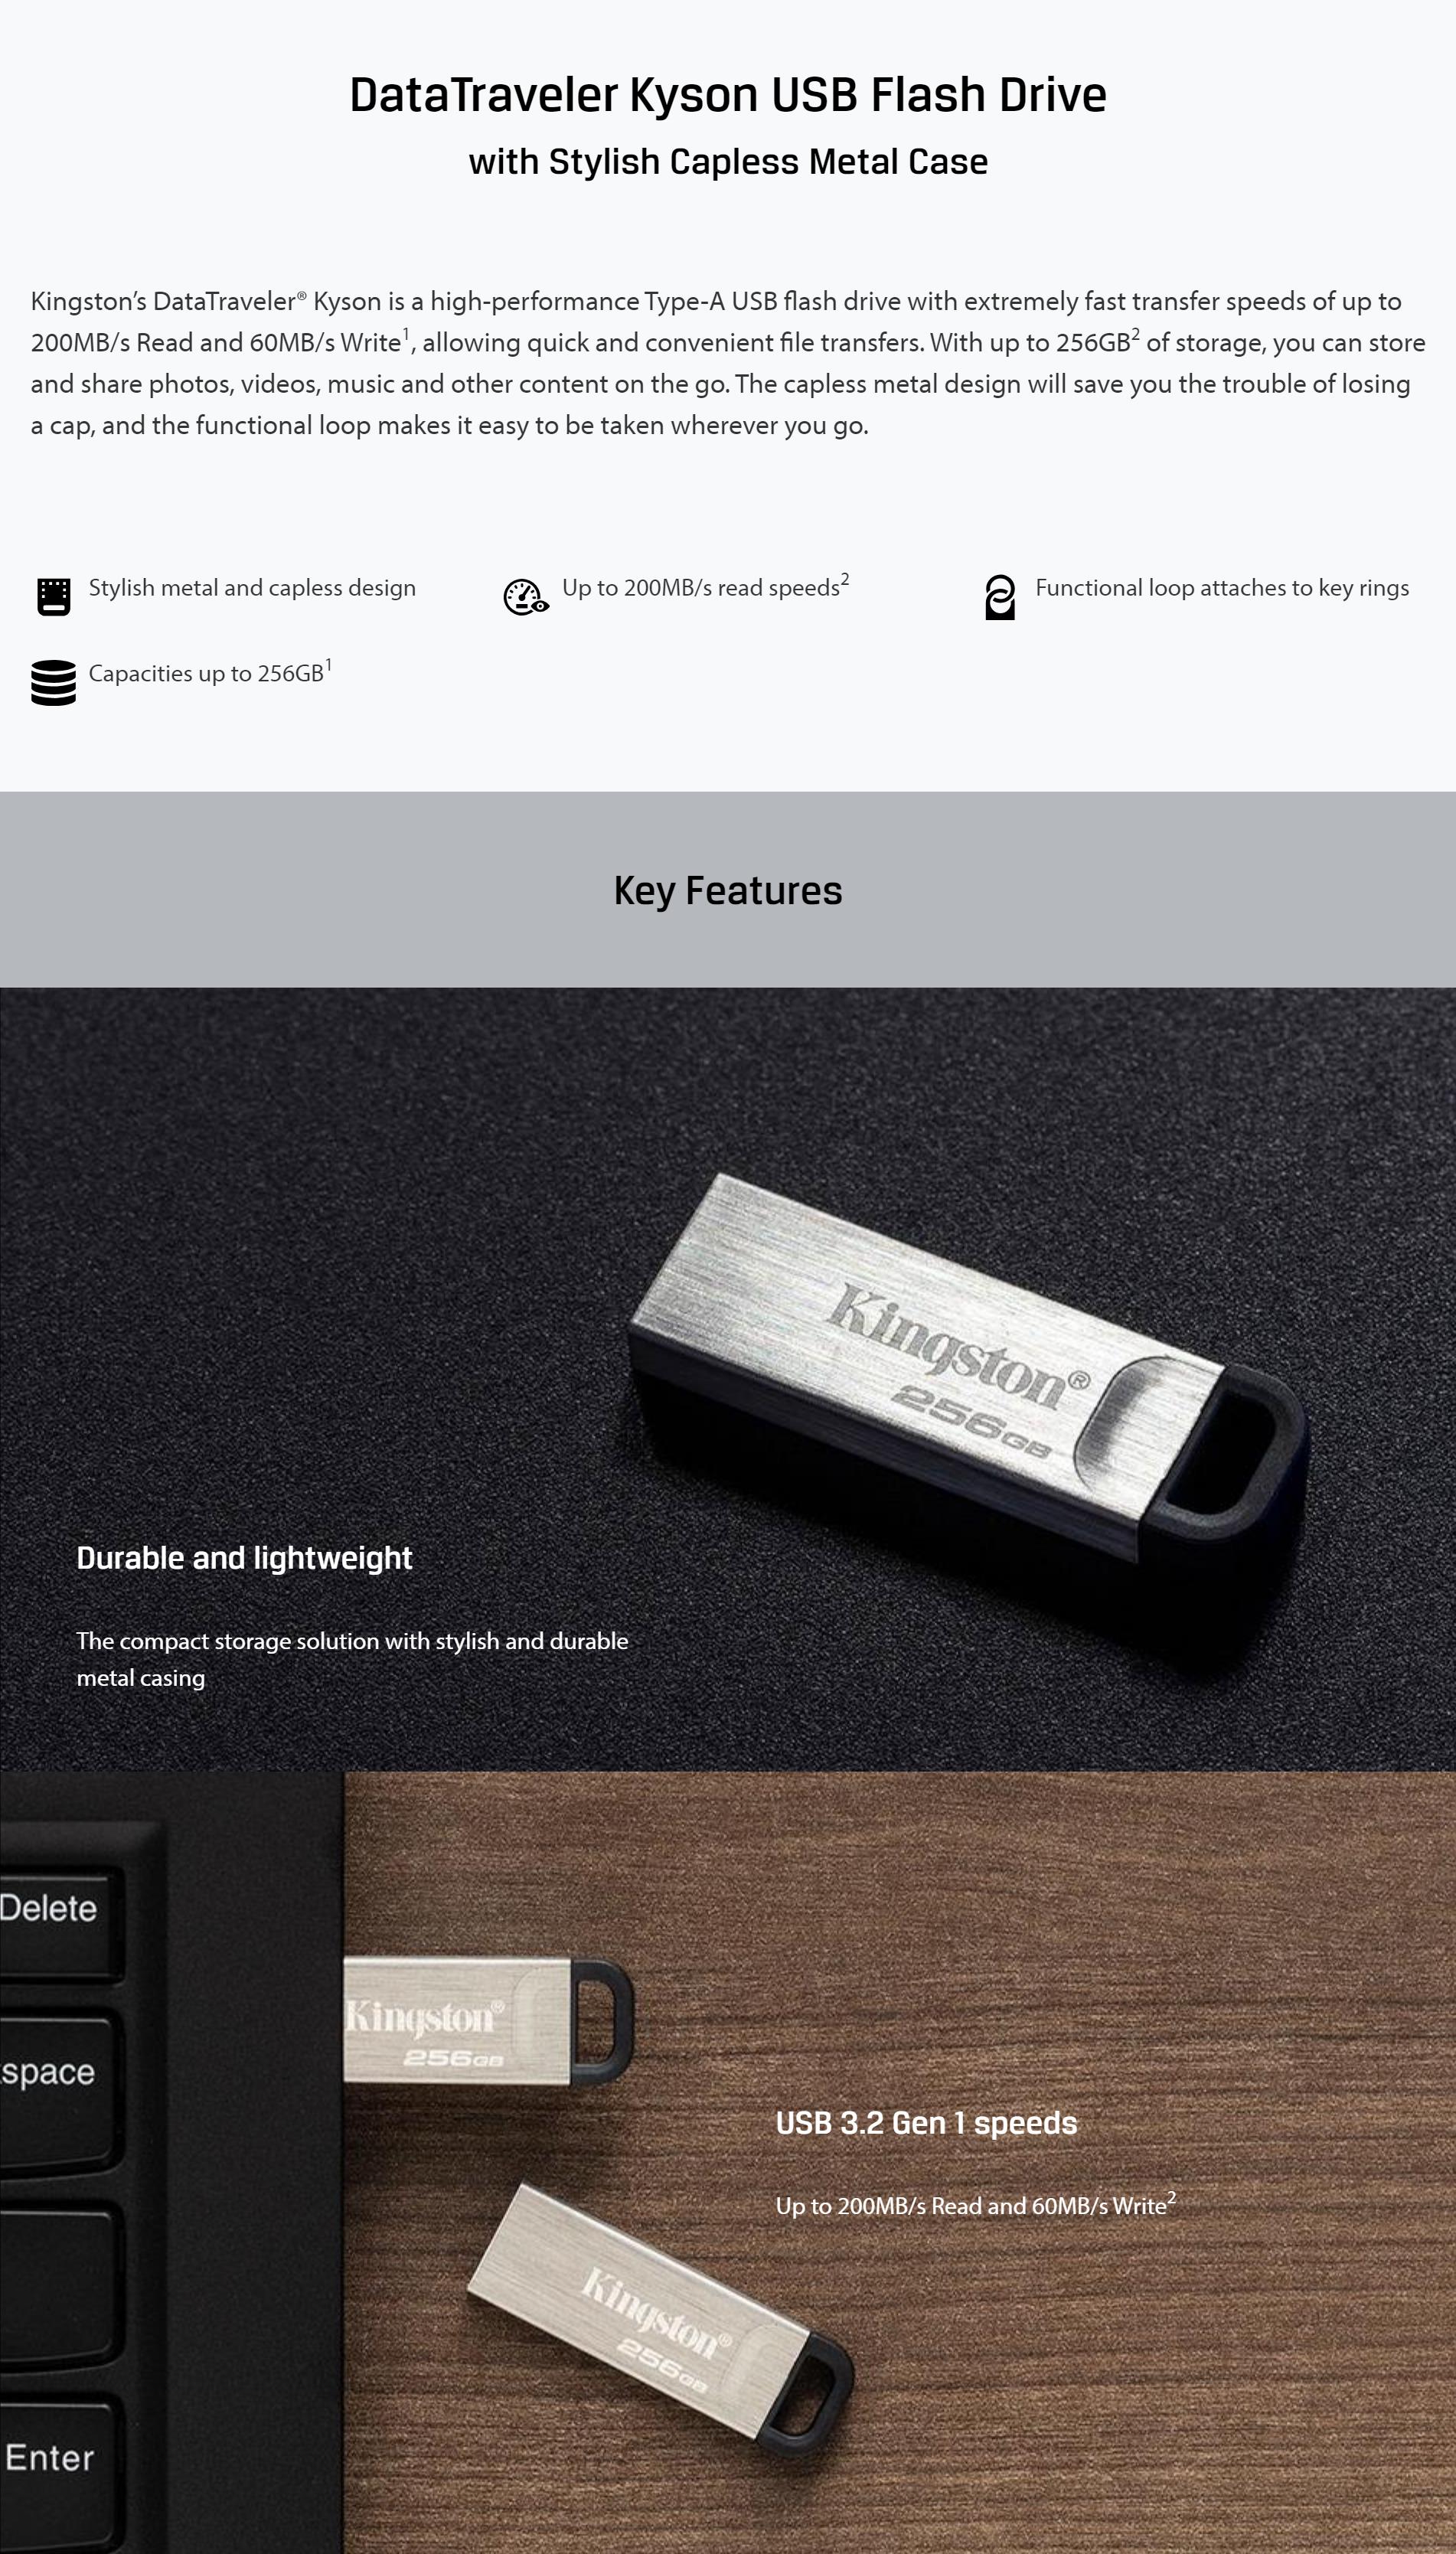 A large marketing image providing additional information about the product Kingston DataTraveler Kyson USB 3.2 64GB Flash Drive - Additional alt info not provided